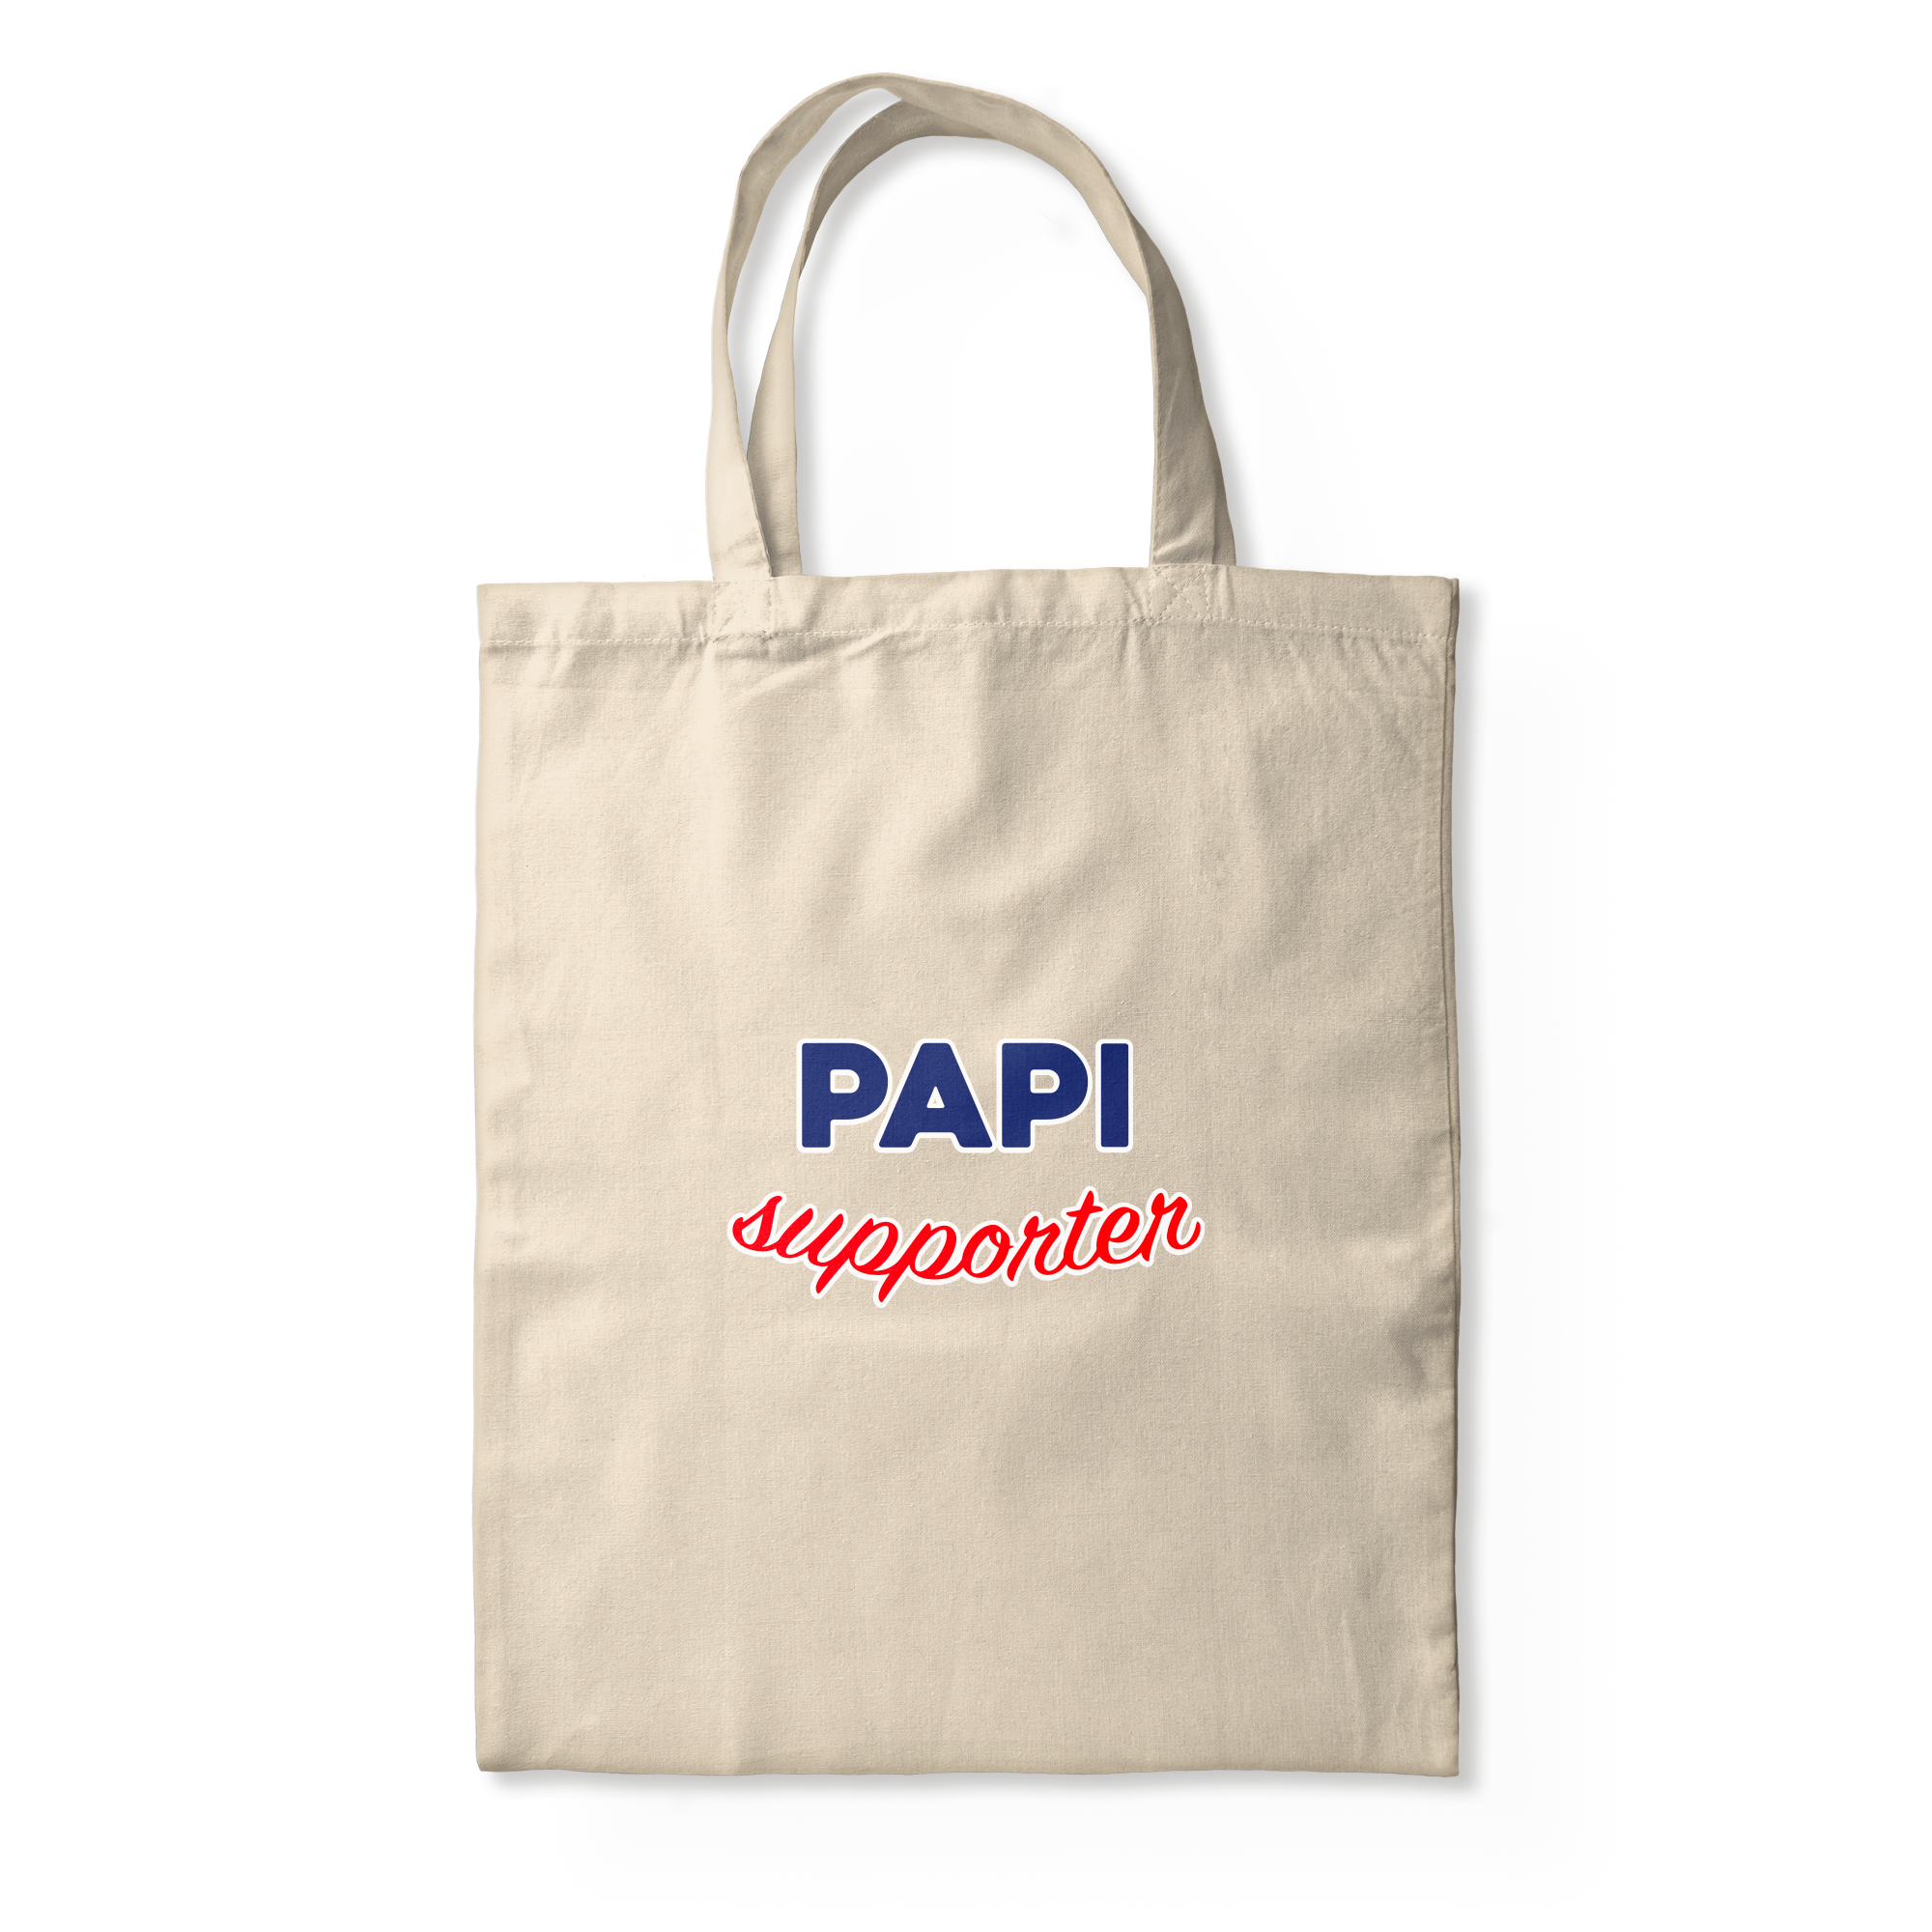 PAPI supporter - TOTE BAG